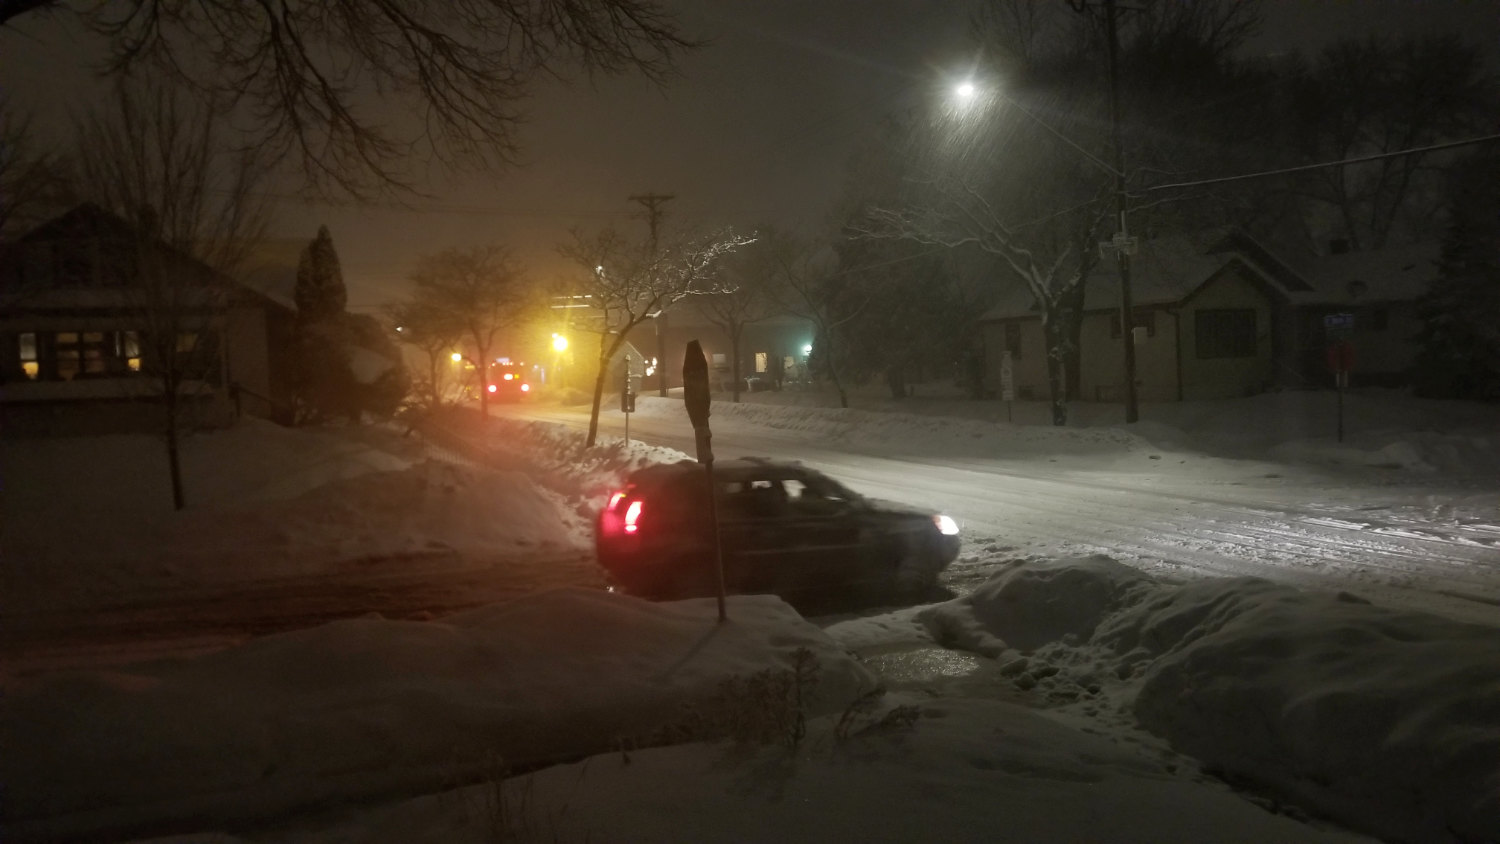 car stopped at snowy intersection at night